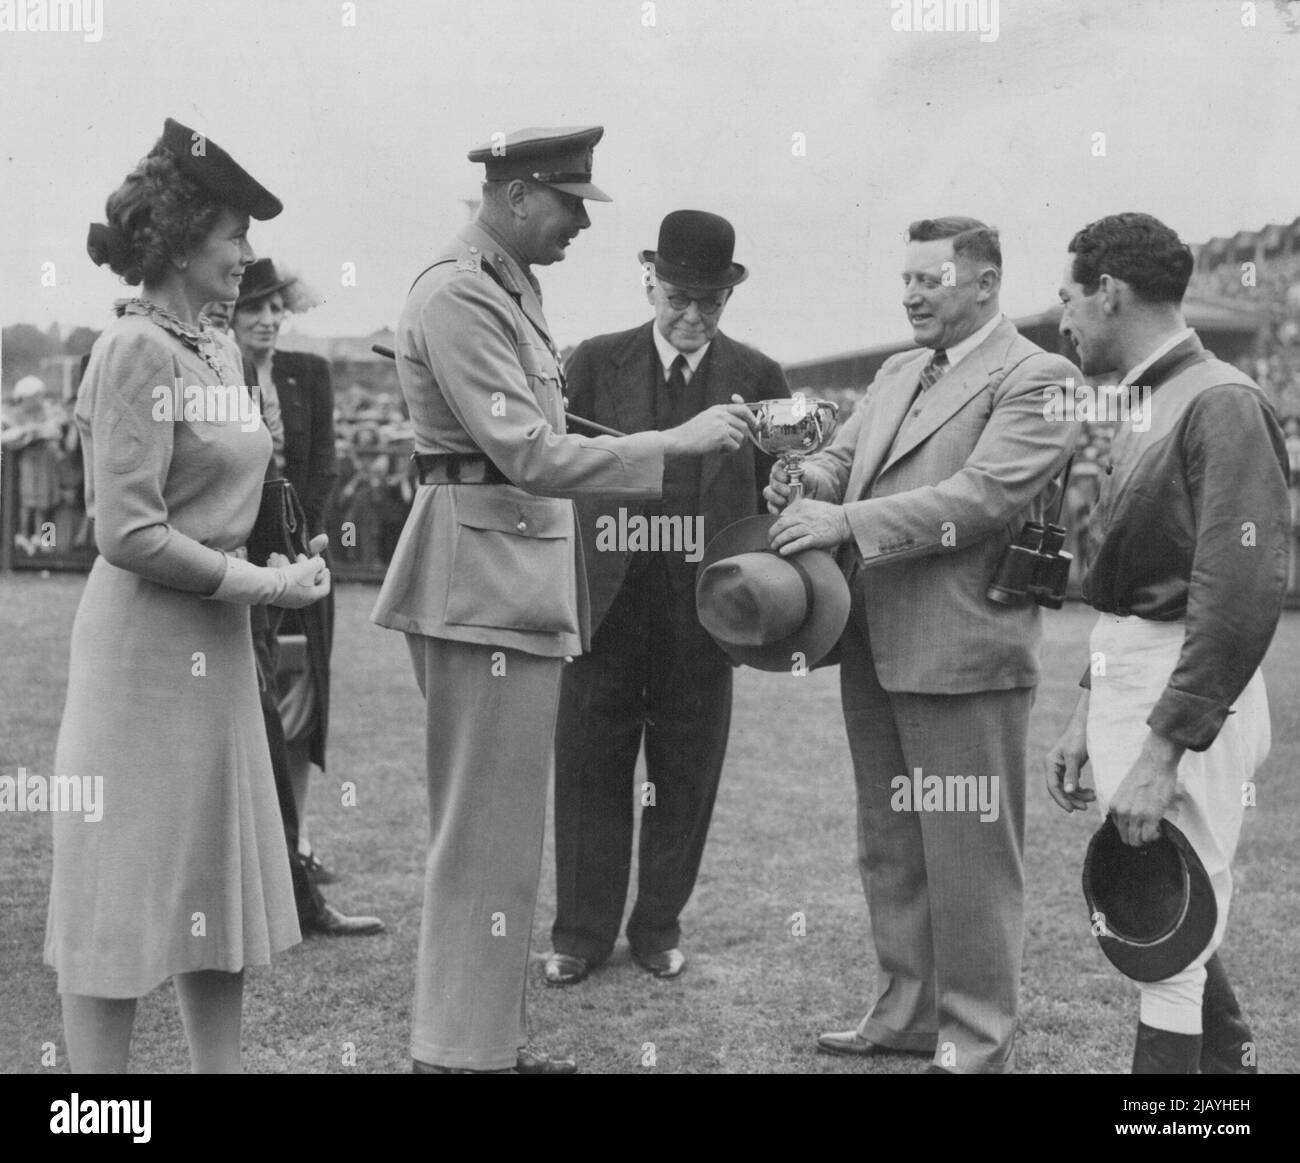 He trained last year's Melbourne cup winner. Who is he? Russia's trainer, E. Hush. November 07, 1946. Stock Photo